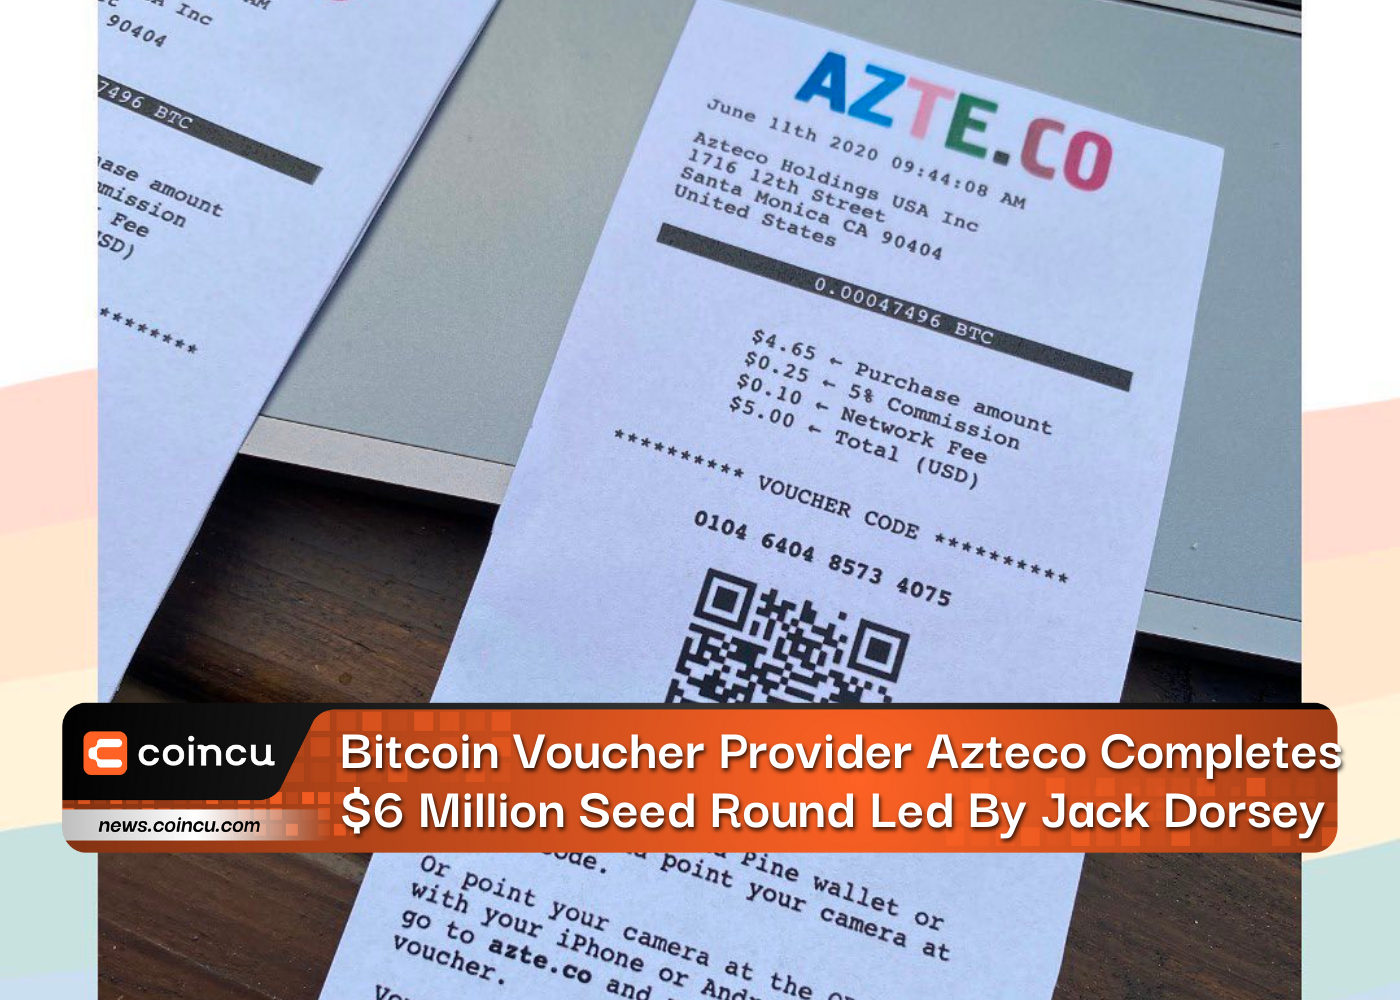 Bitcoin Voucher Provider Azteco Completes $6 Million Seed Round Led By Jack Dorsey